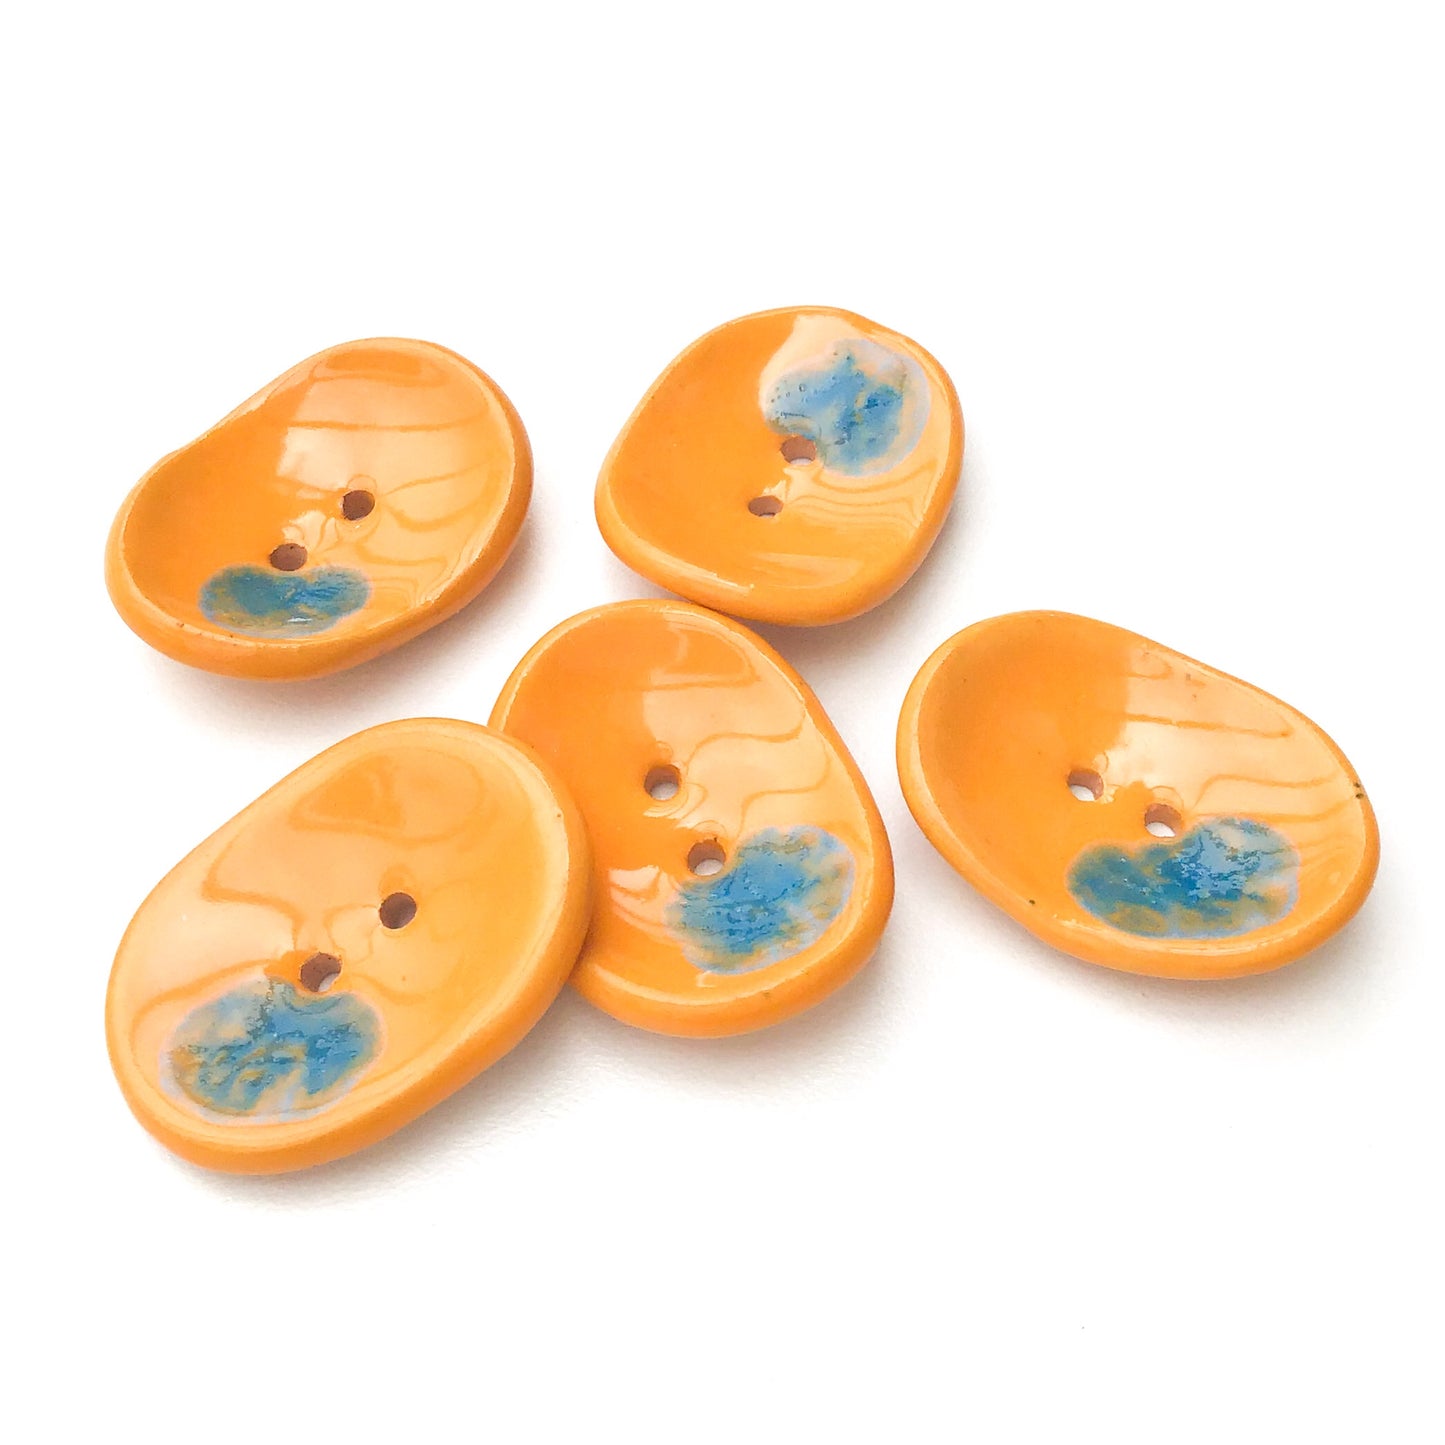 Decorative Ceramic Button with Shimmery Color Drips - Orange - Blue - Oval Clay Button - 1" x 1 1/4"